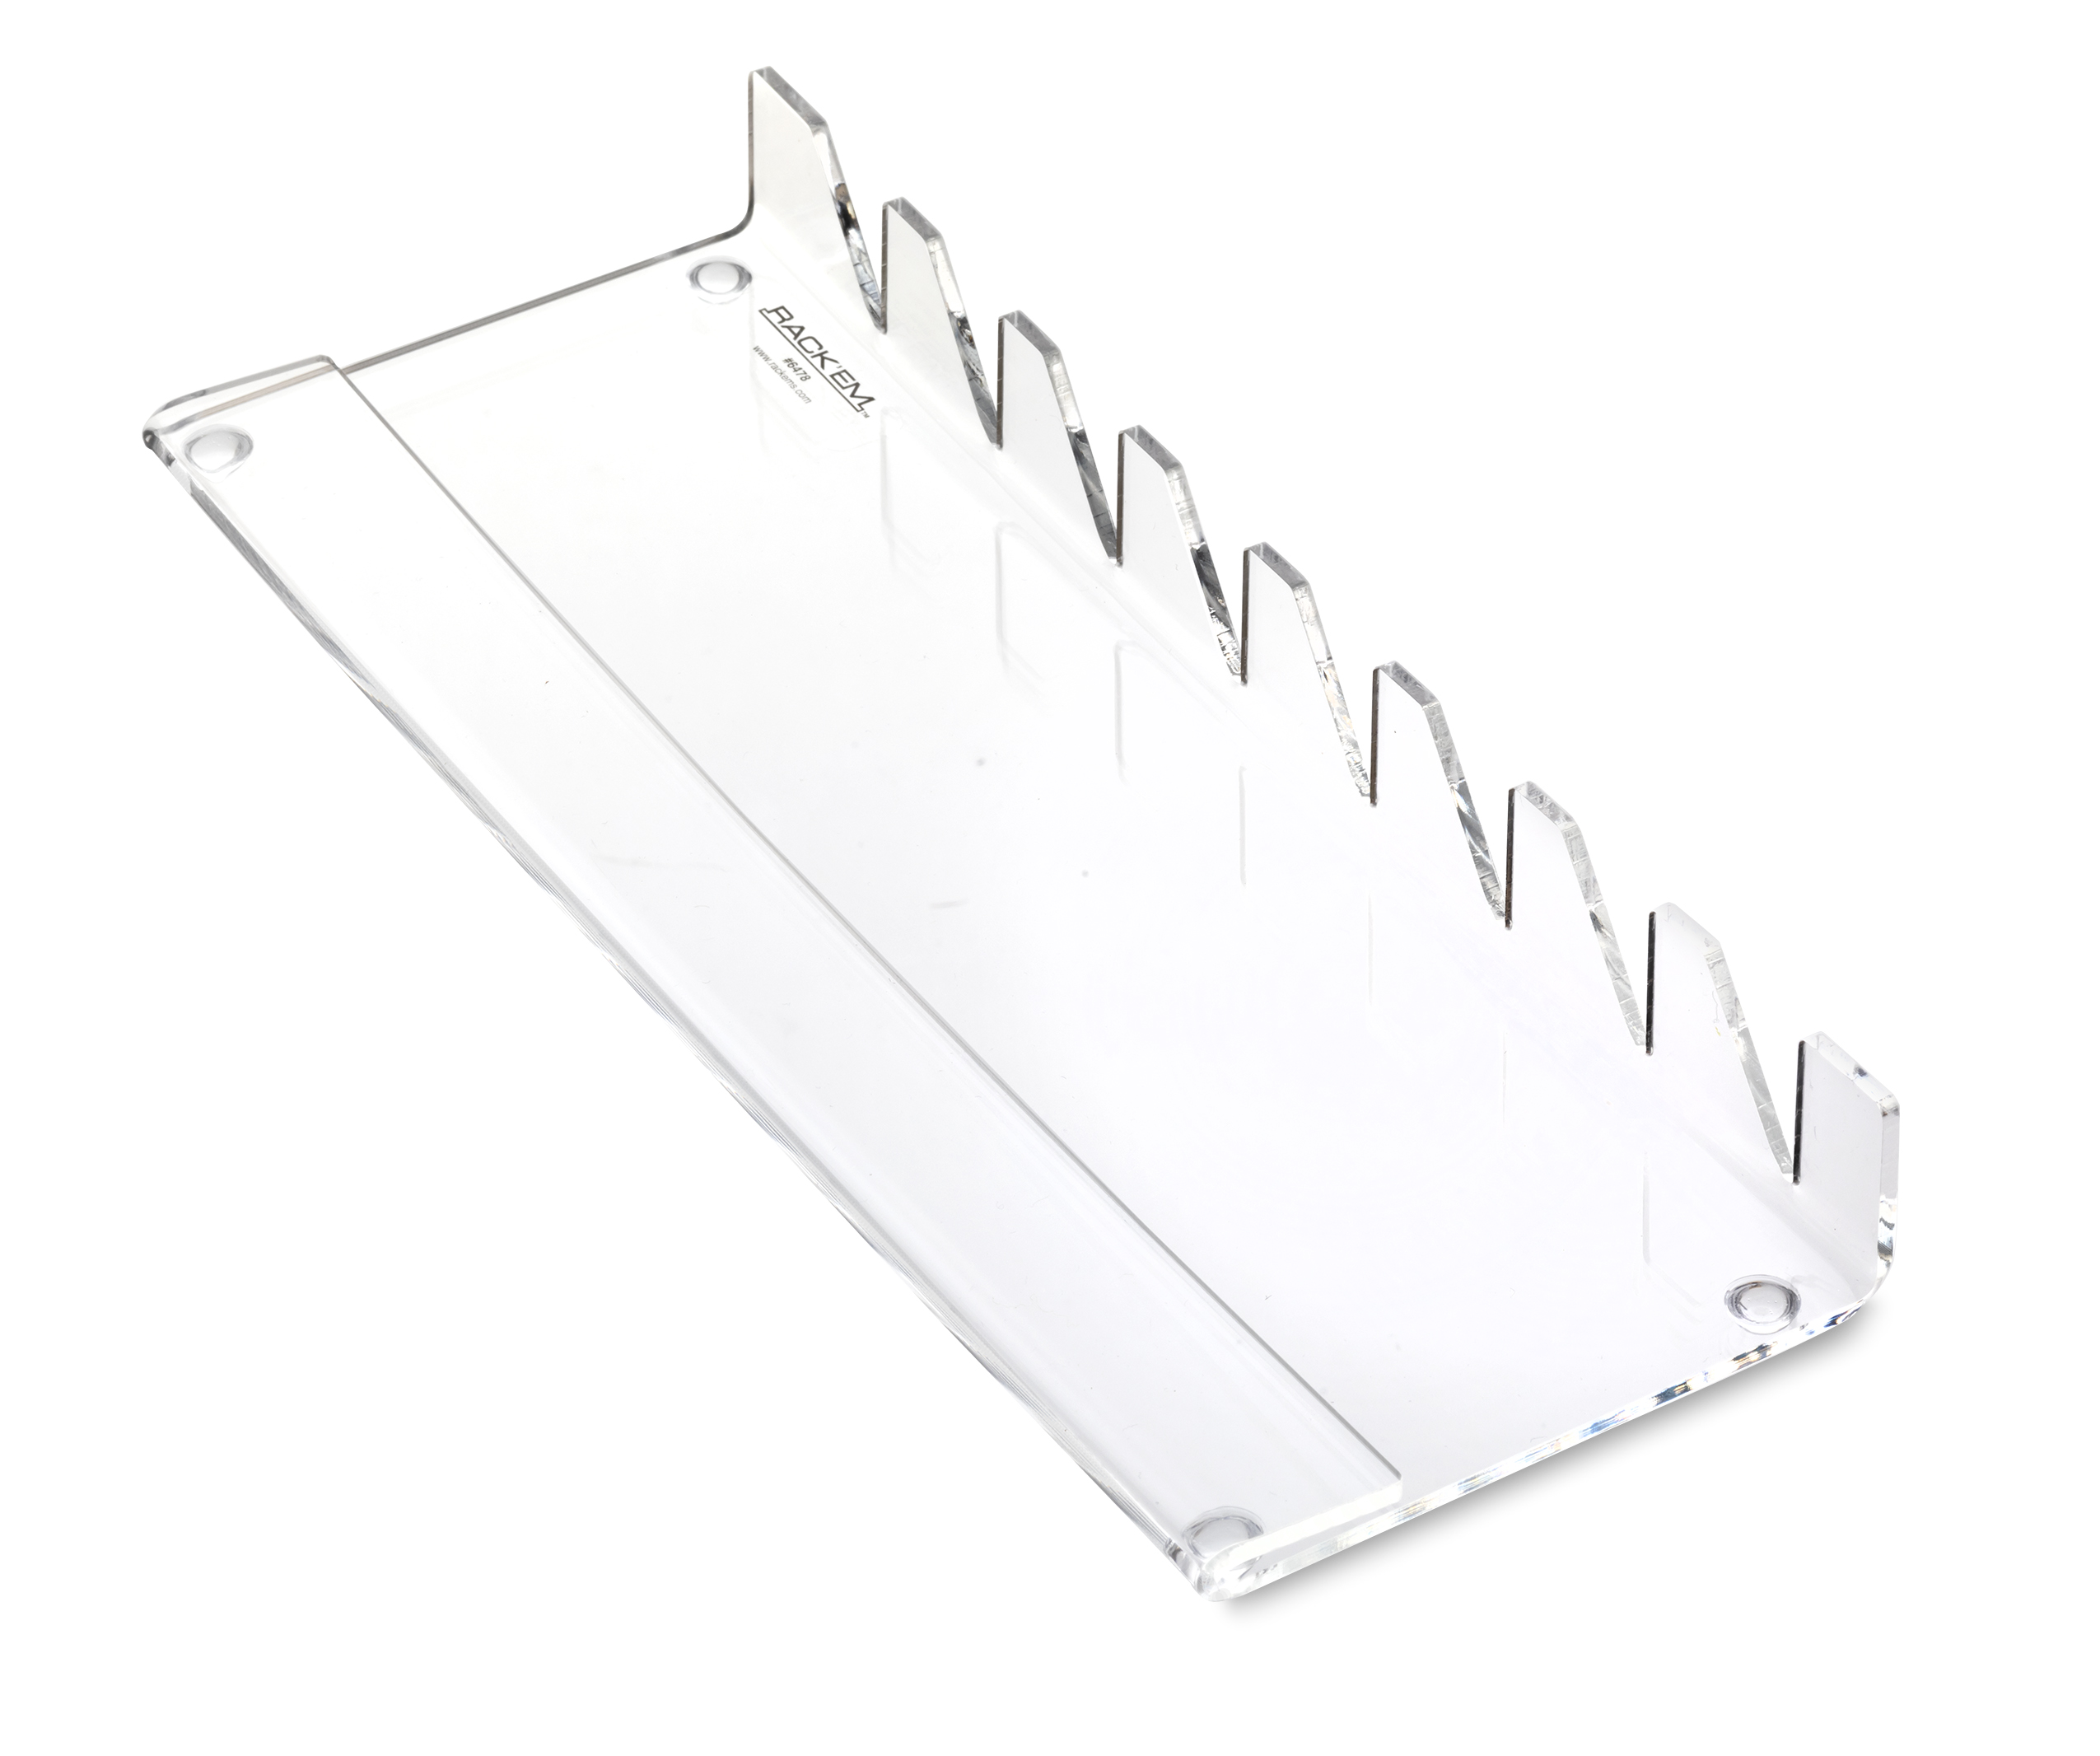 8-Knife Acrylic Display with price tag holder. Multipack of 10 pcs (SKU ...